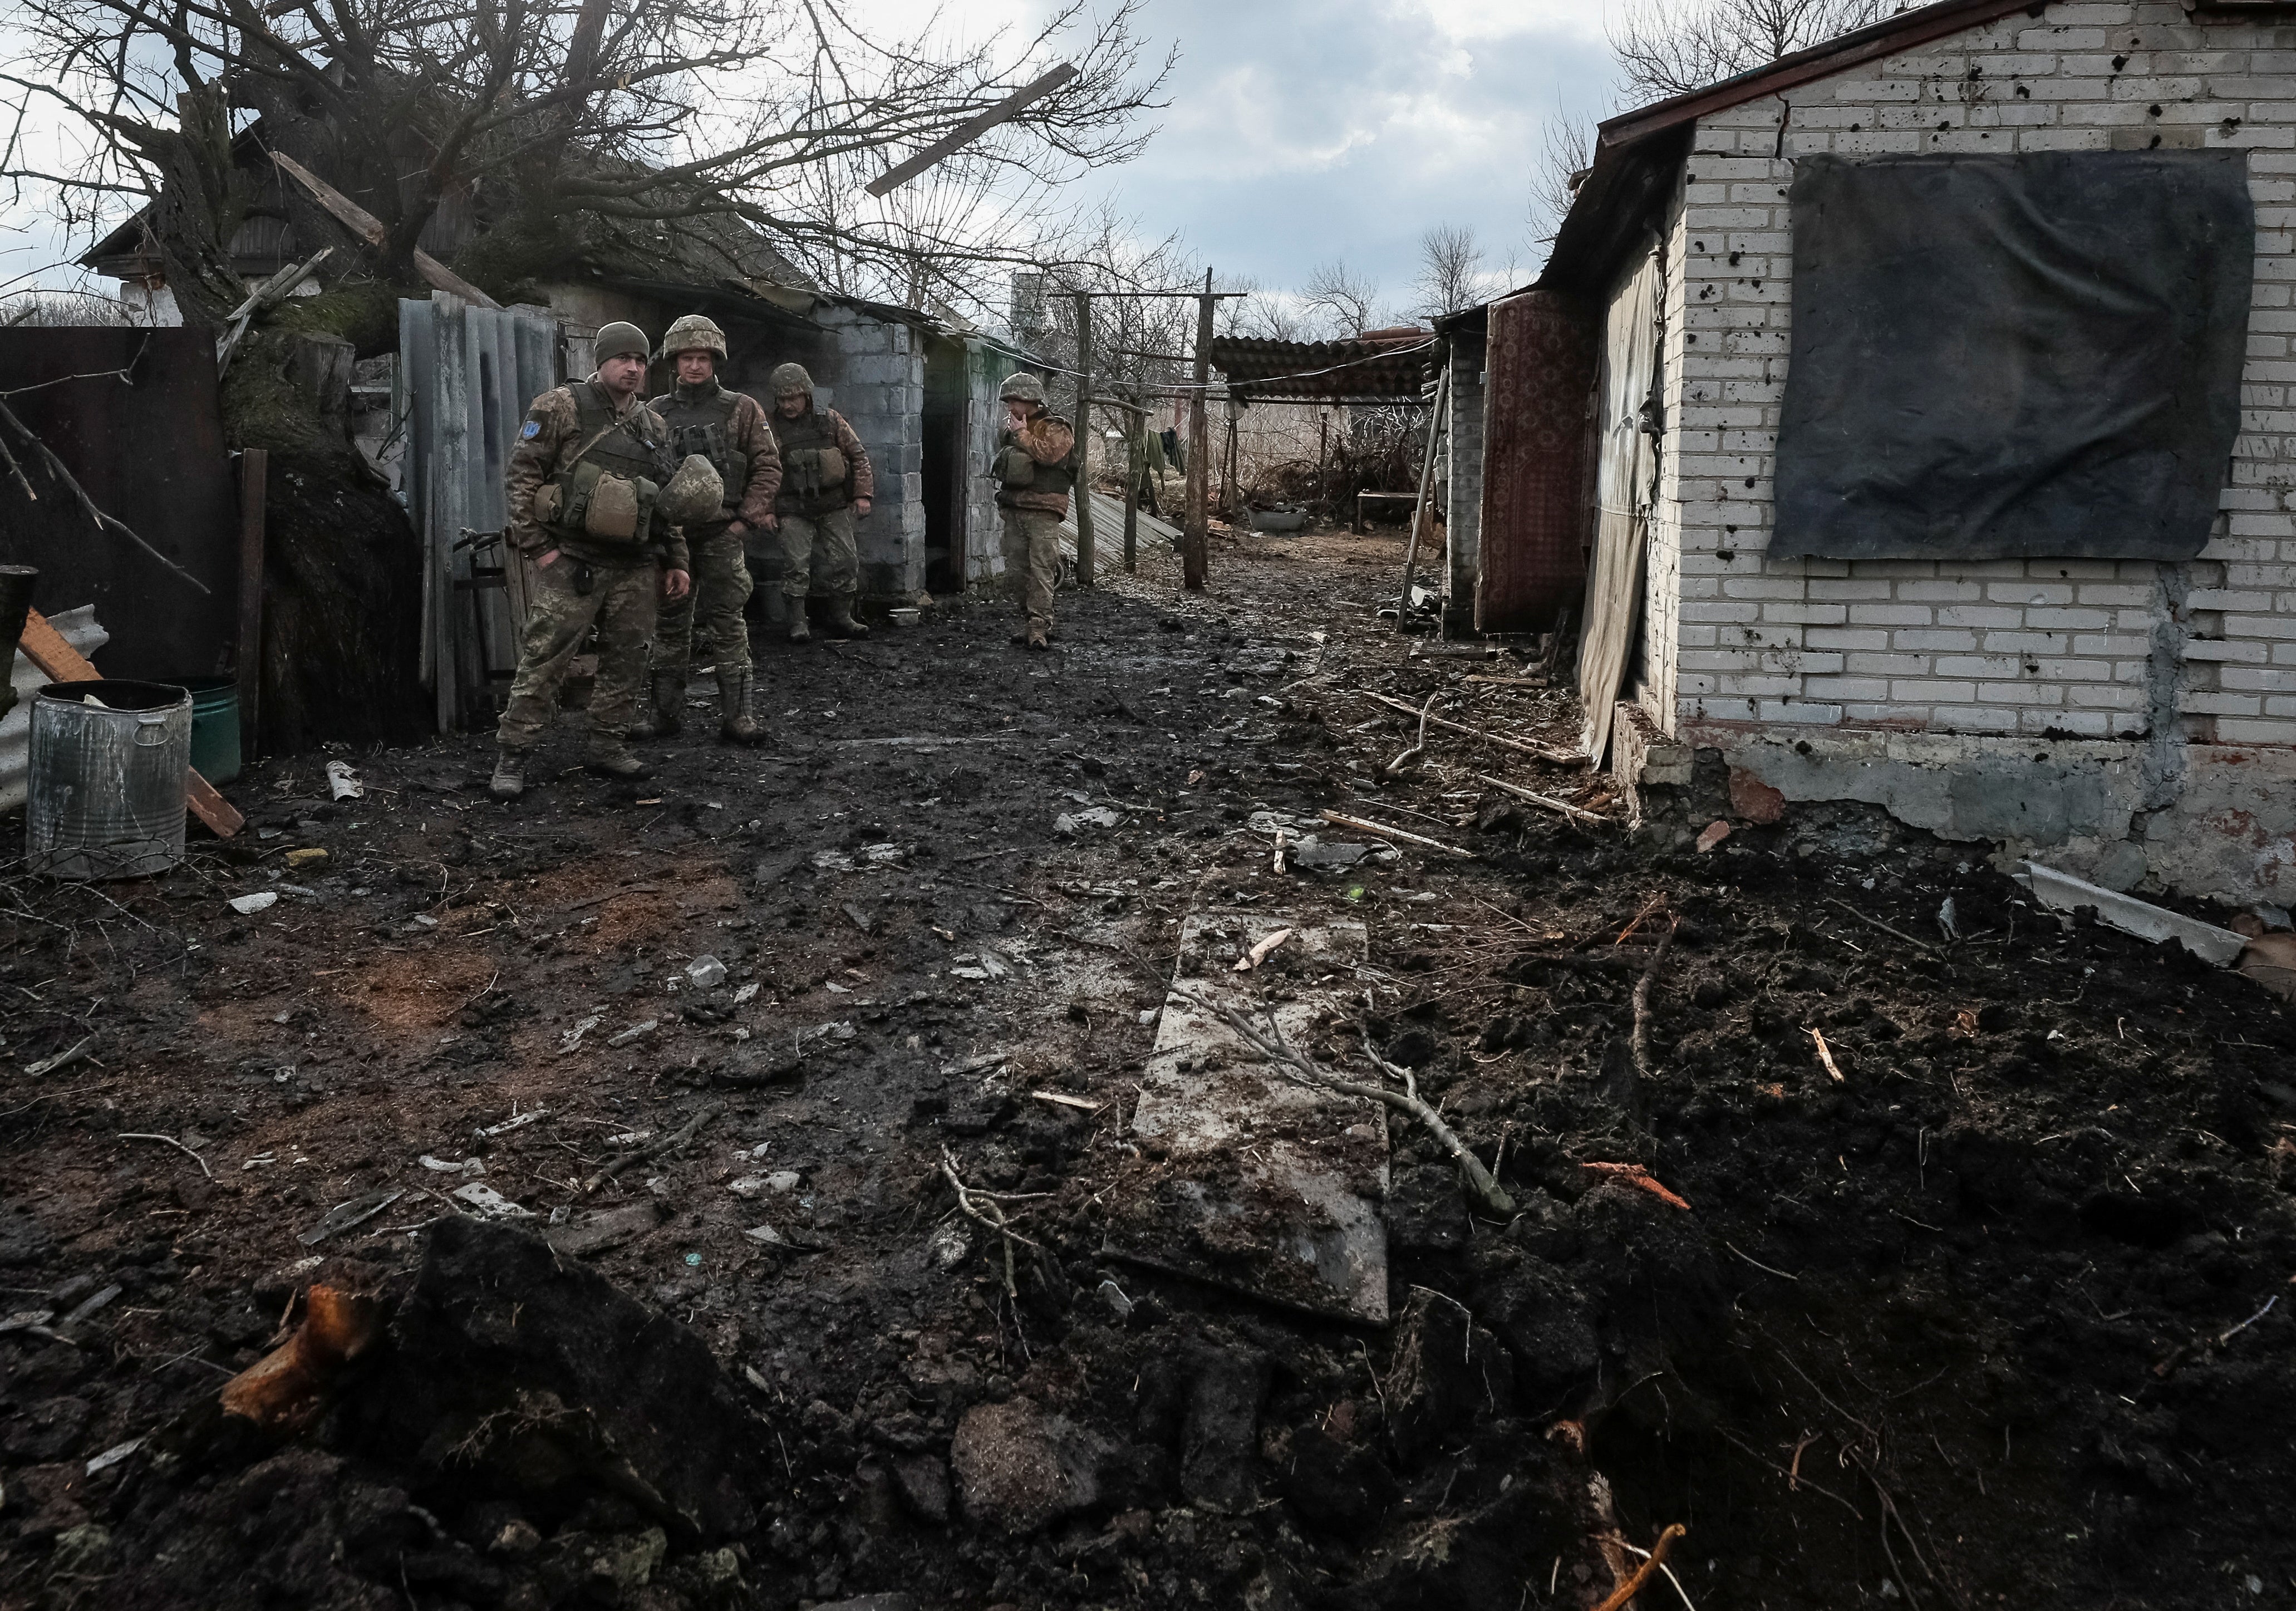 Ukrainian service members are seen on the front line after a shelling near the village of Zaitseve in the Donetsk region, Ukraine, 19 February 2022